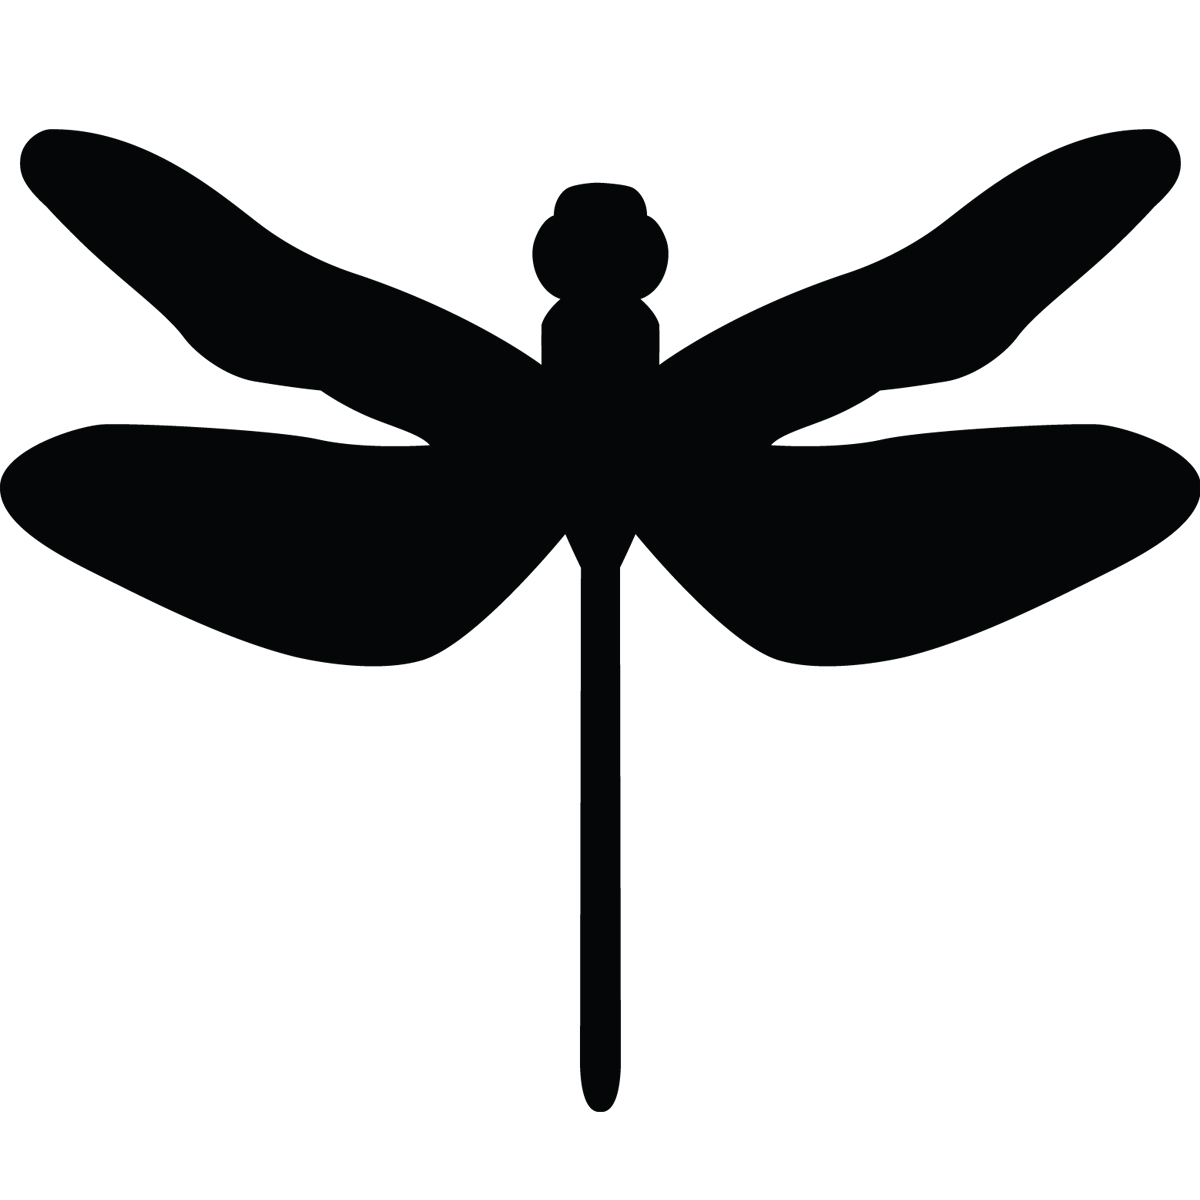 Animals wall decals - Dragonfly Silhouette Wall decal | Ambiance ...